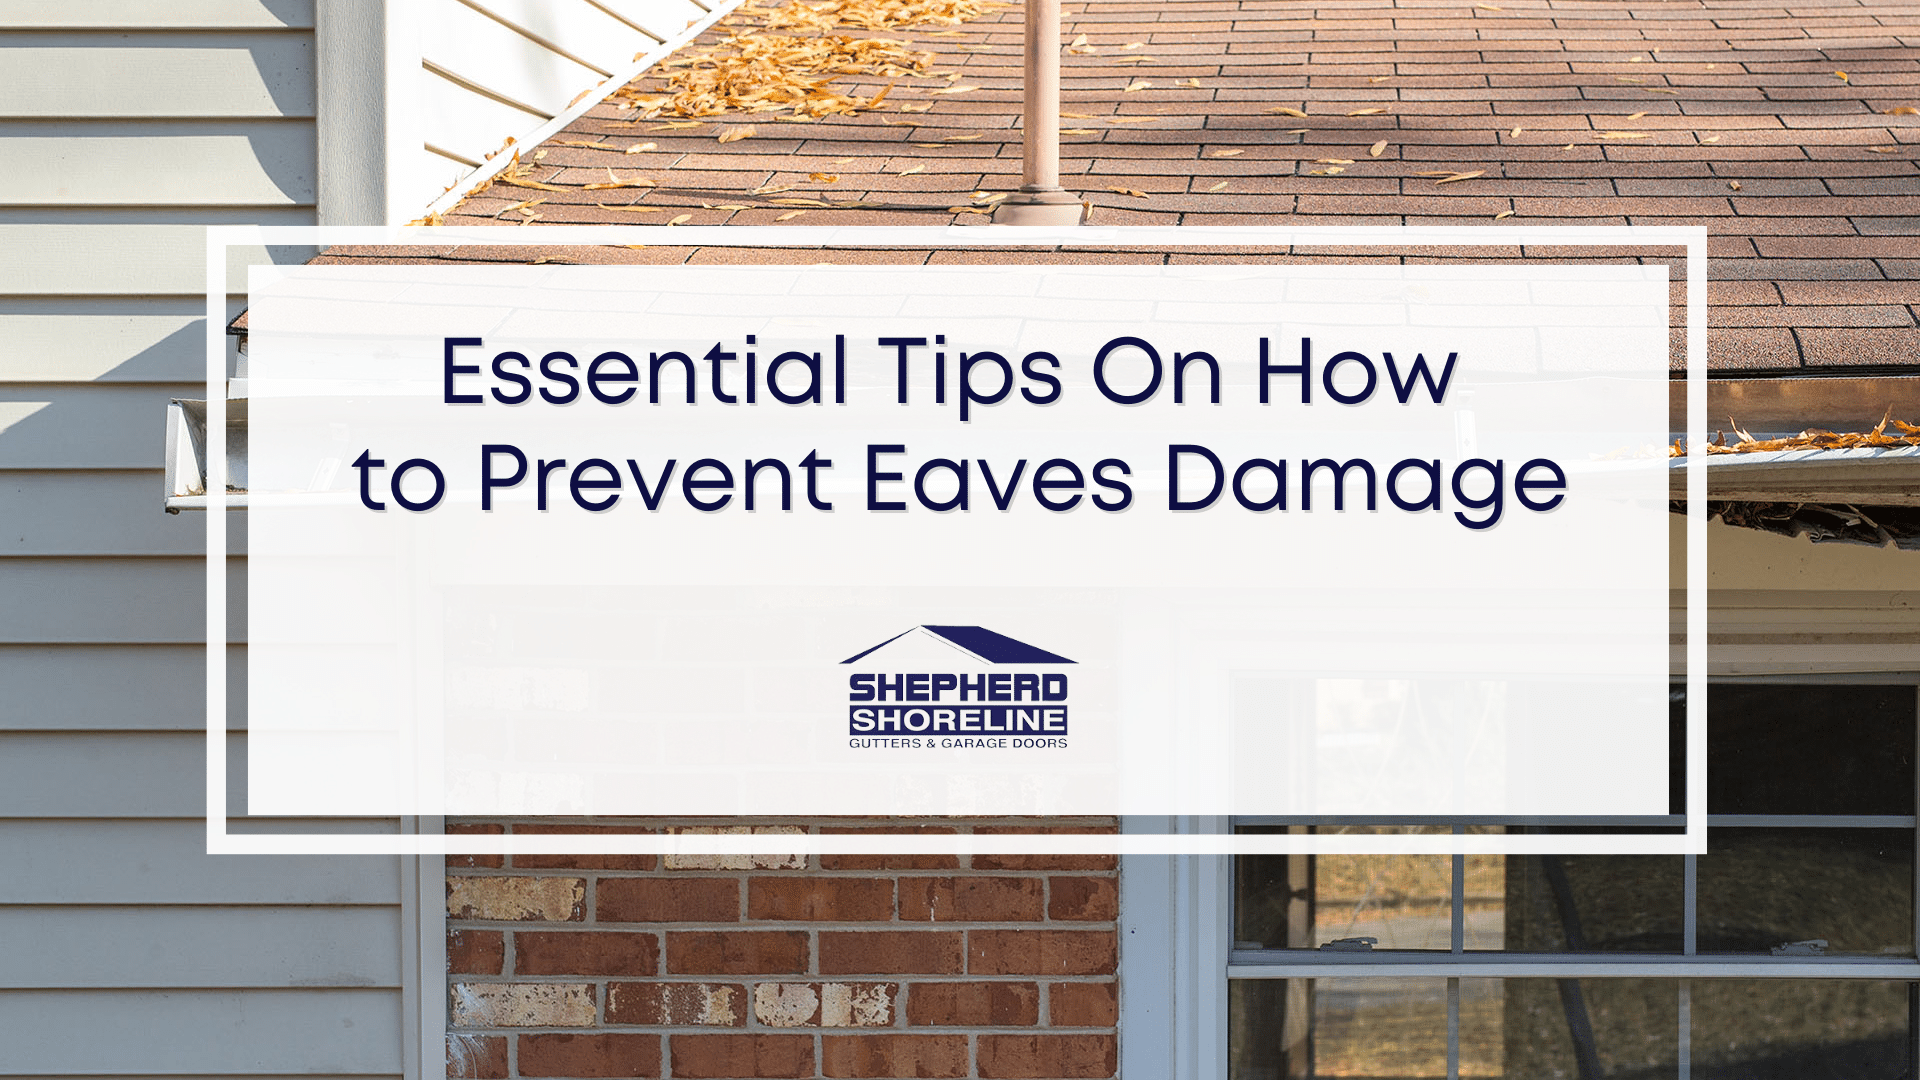 Featured image of essential tips on how to prevent eaves damage